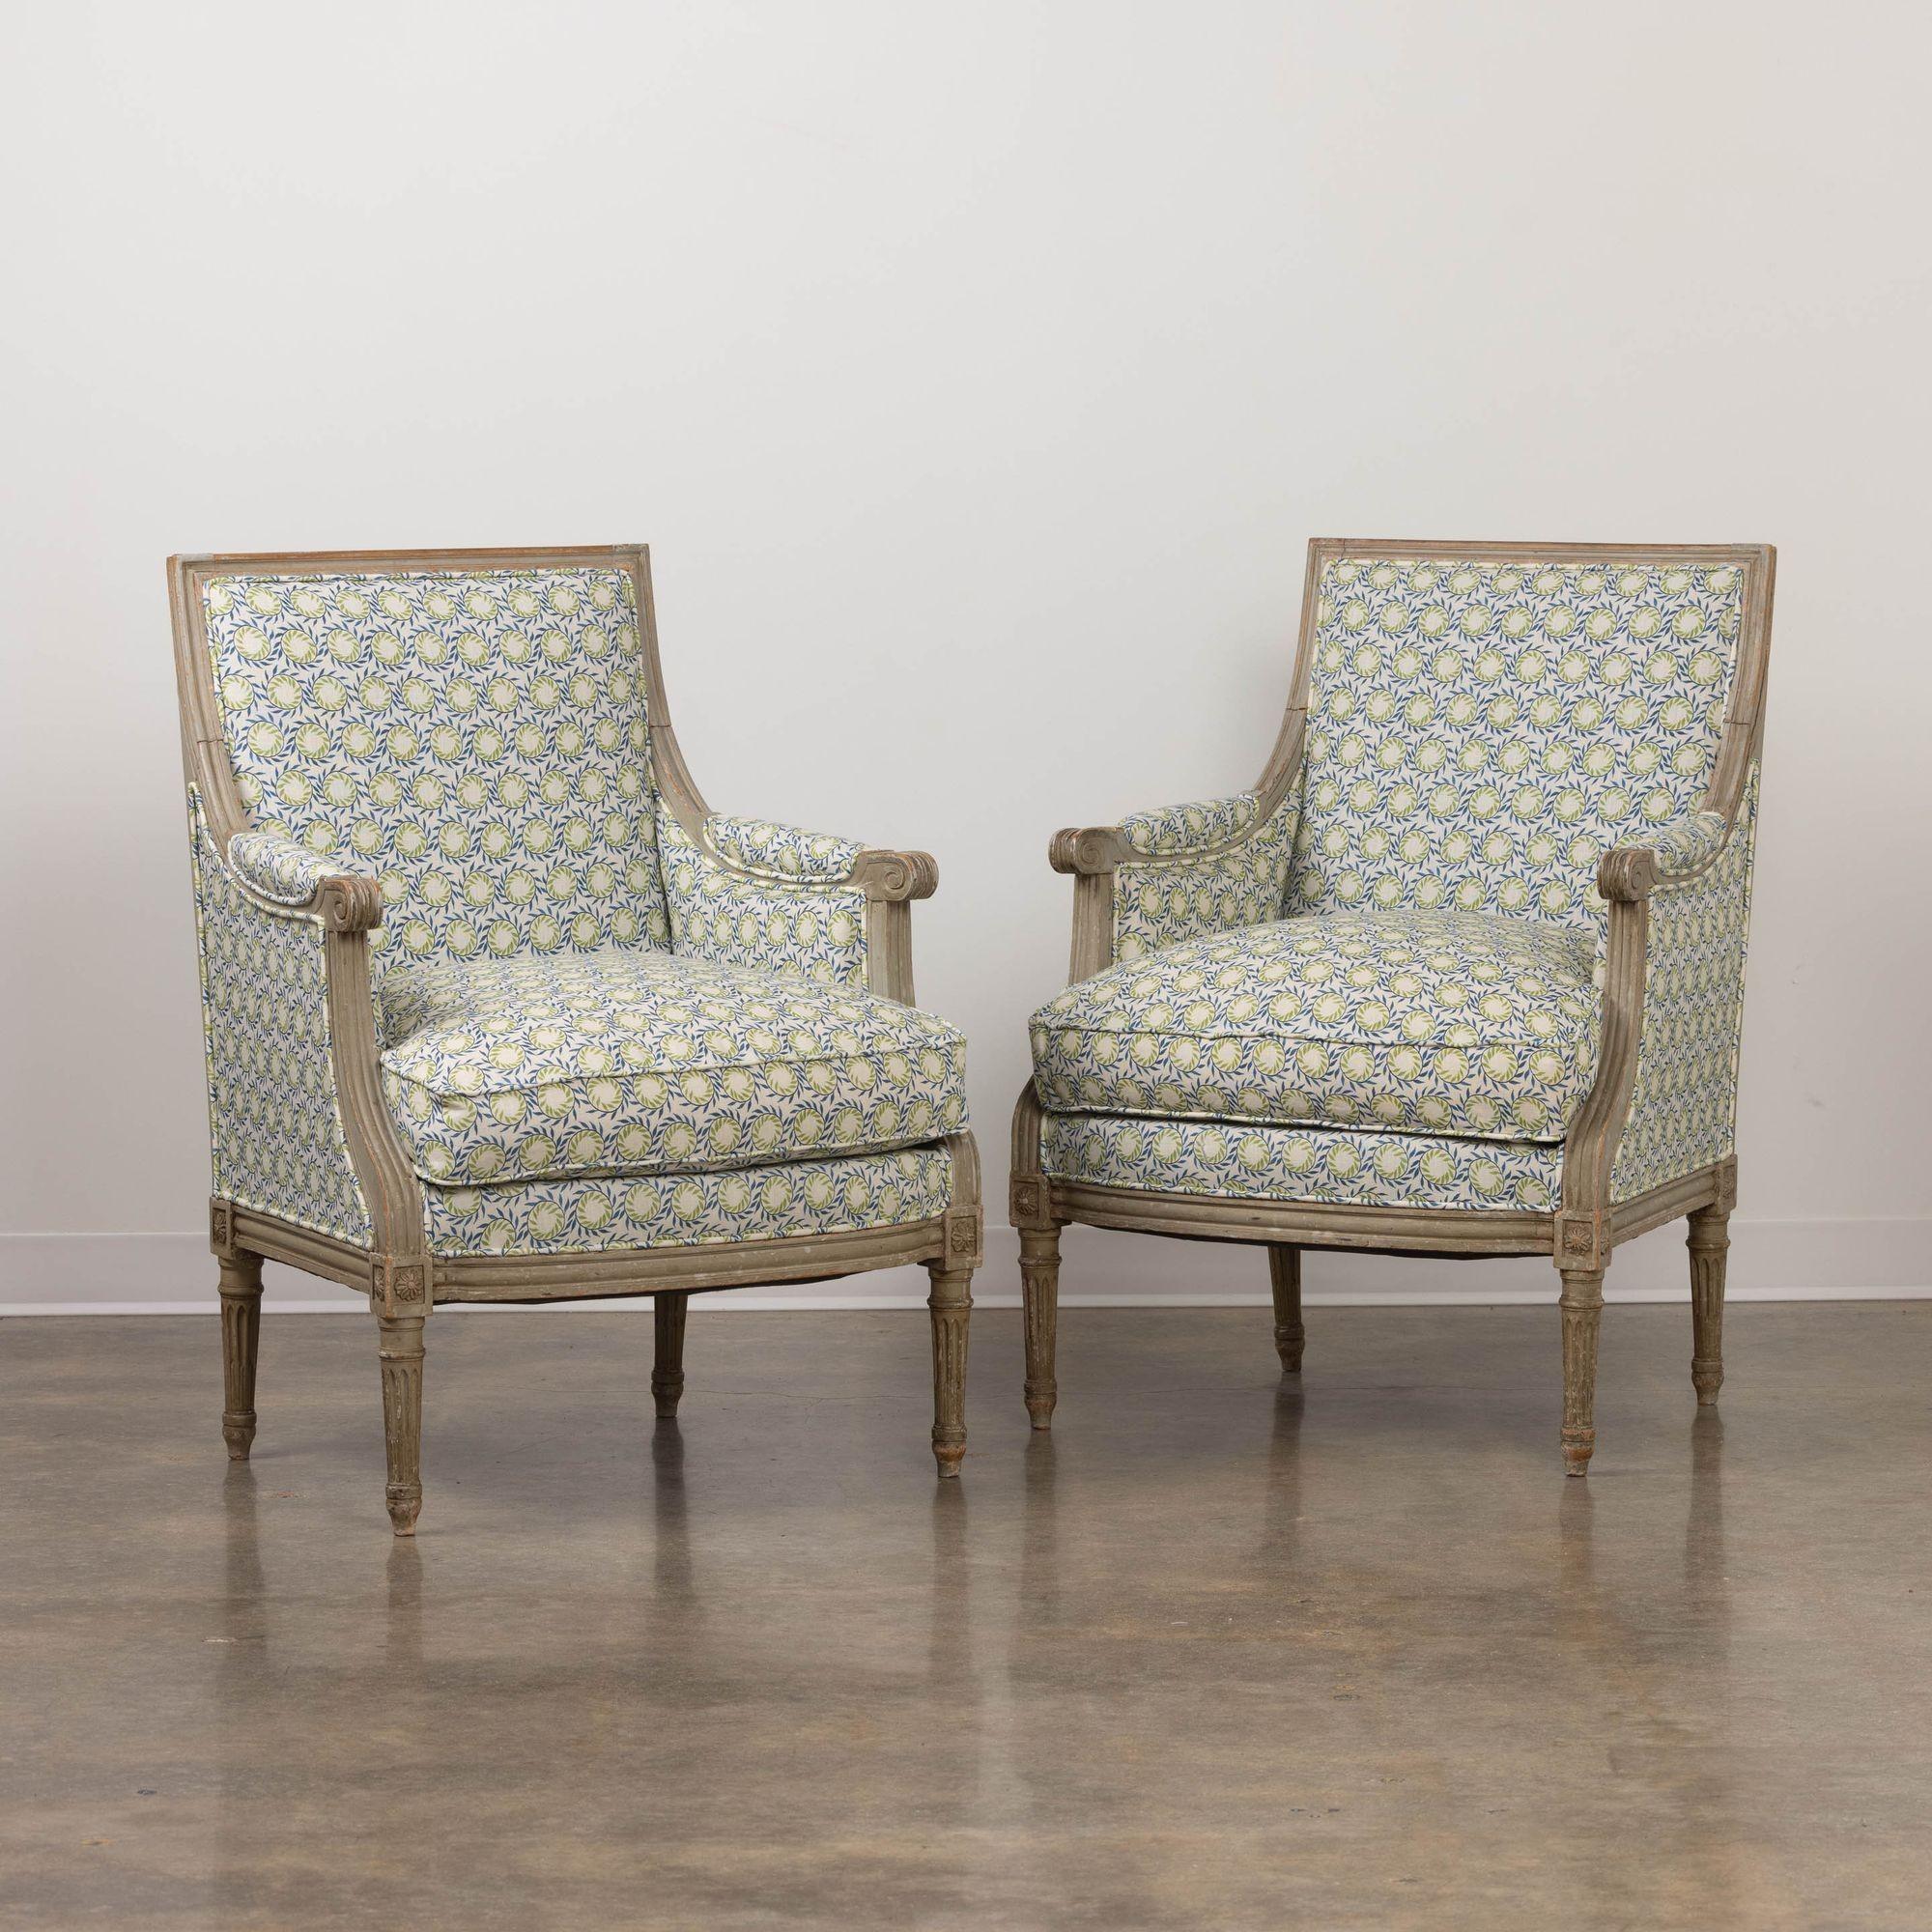 A pair of French Louis XVI style bergères in original paint from the 19th century. Newly upholstered and very comfortable.